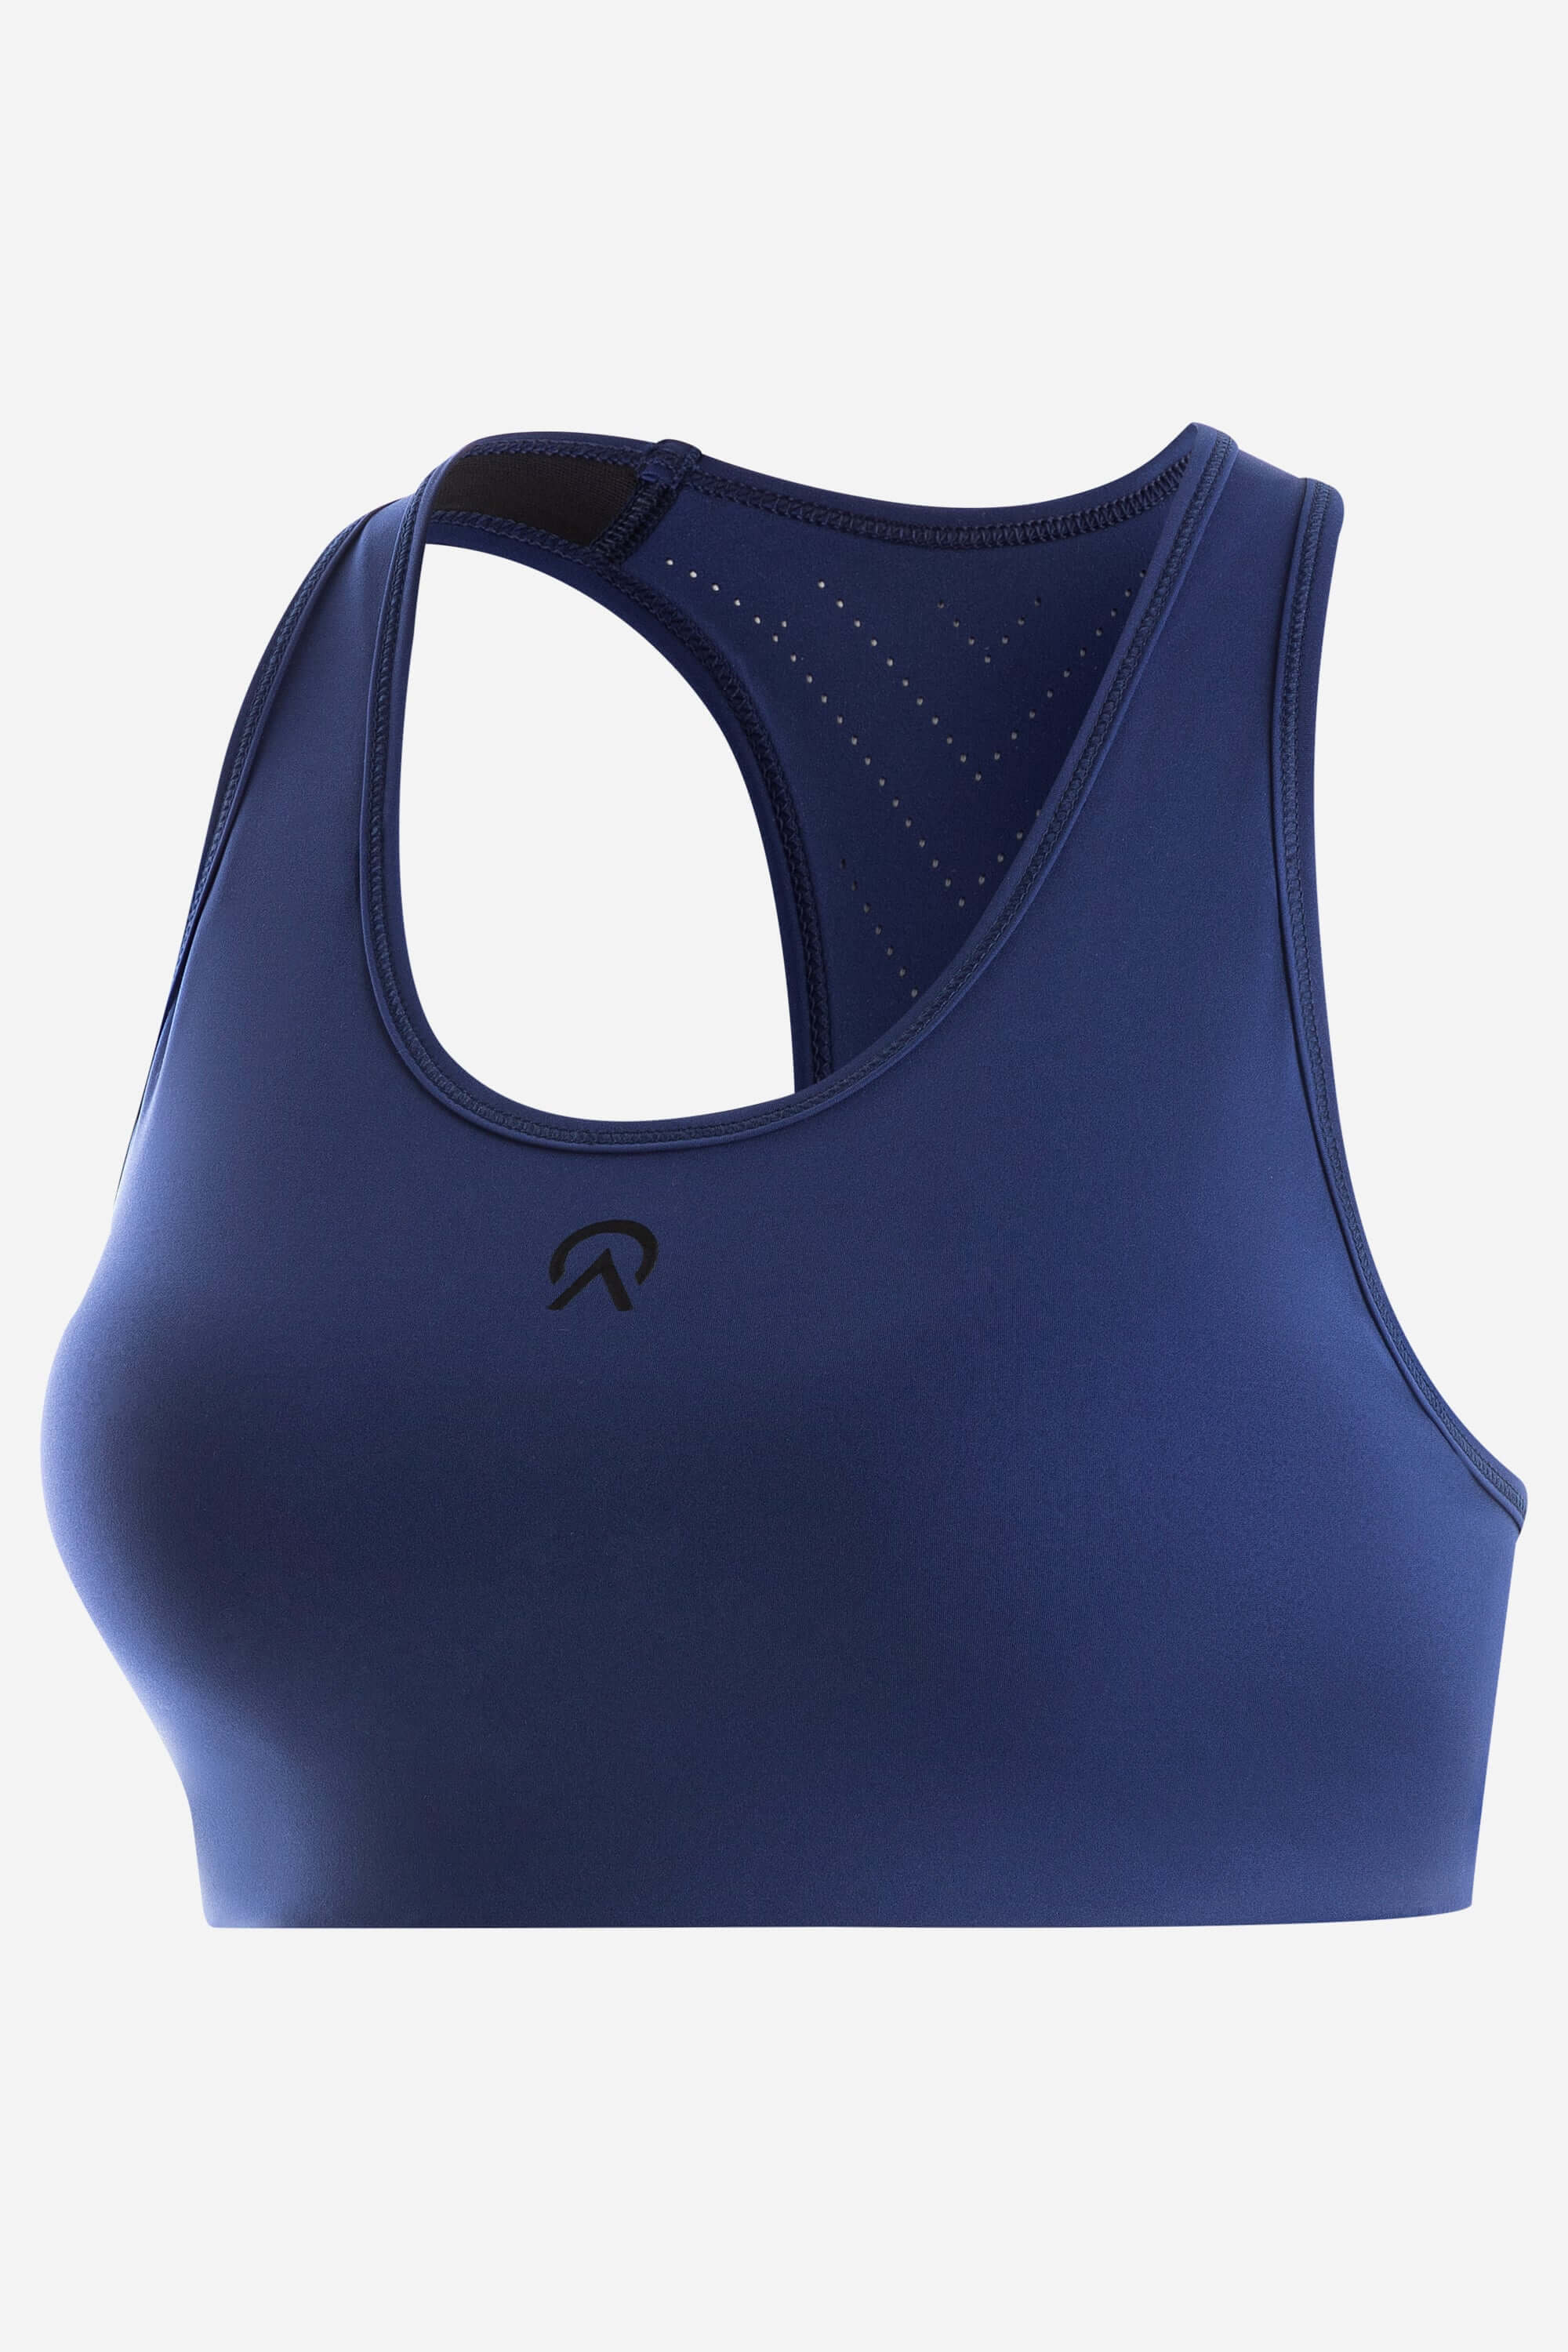 Blue training sports bra in with laser cut holes in the back